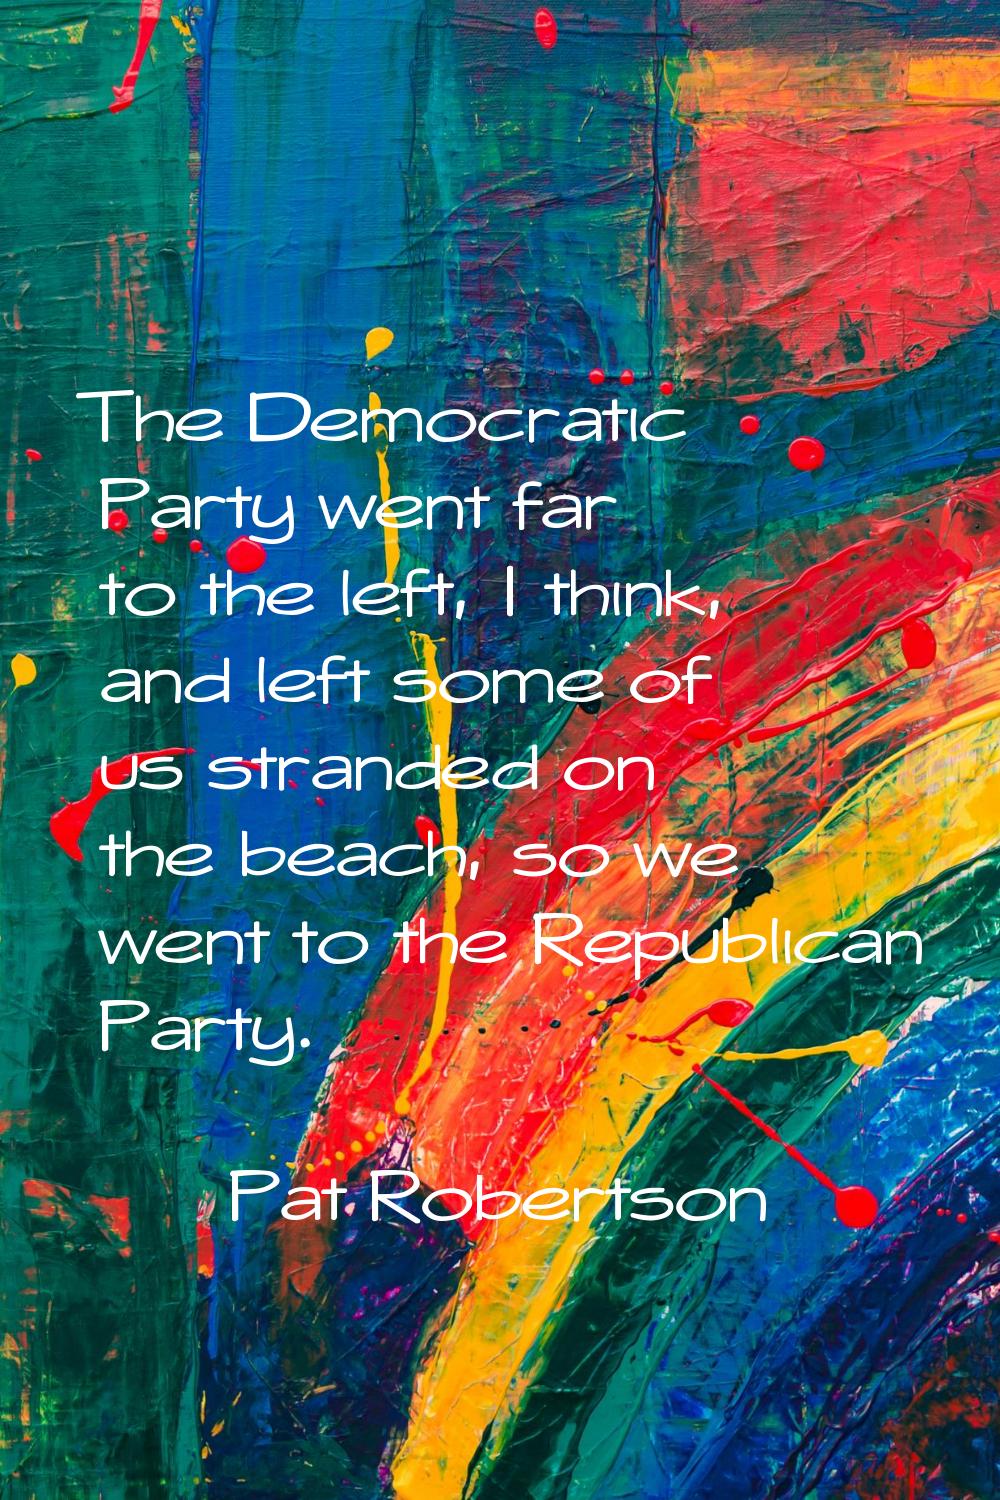 The Democratic Party went far to the left, I think, and left some of us stranded on the beach, so w